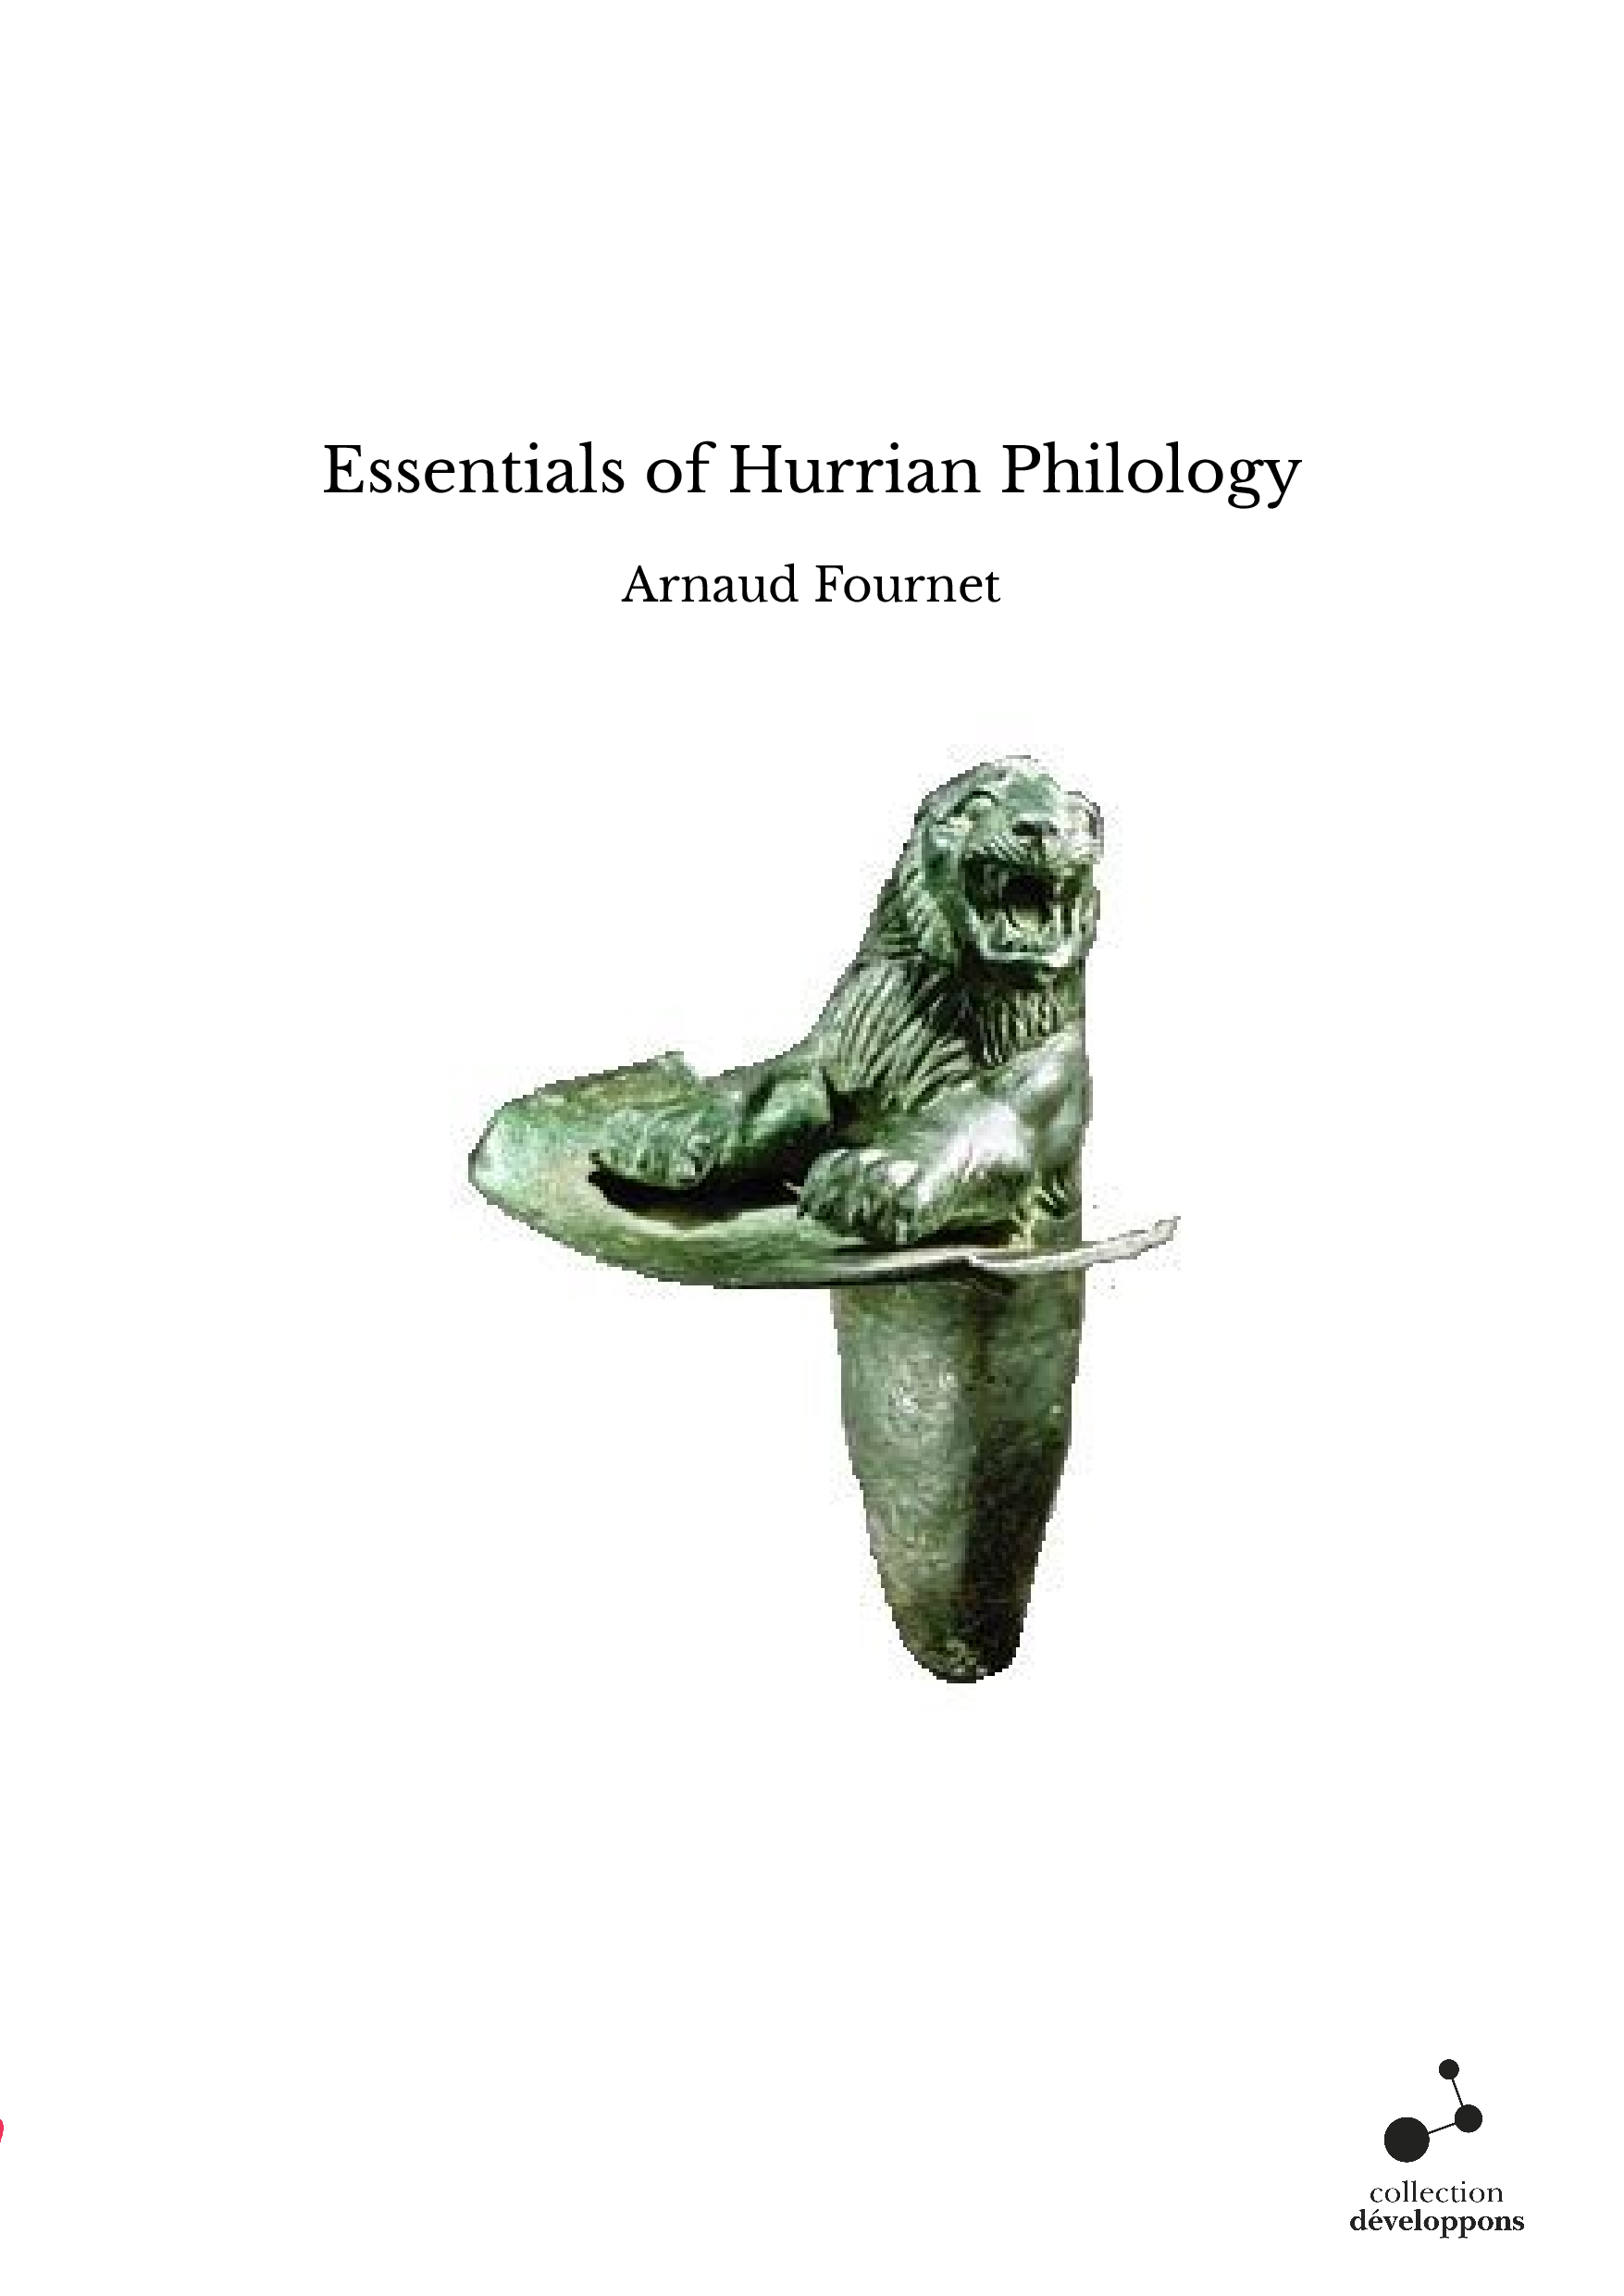 Essentials of Hurrian Philology